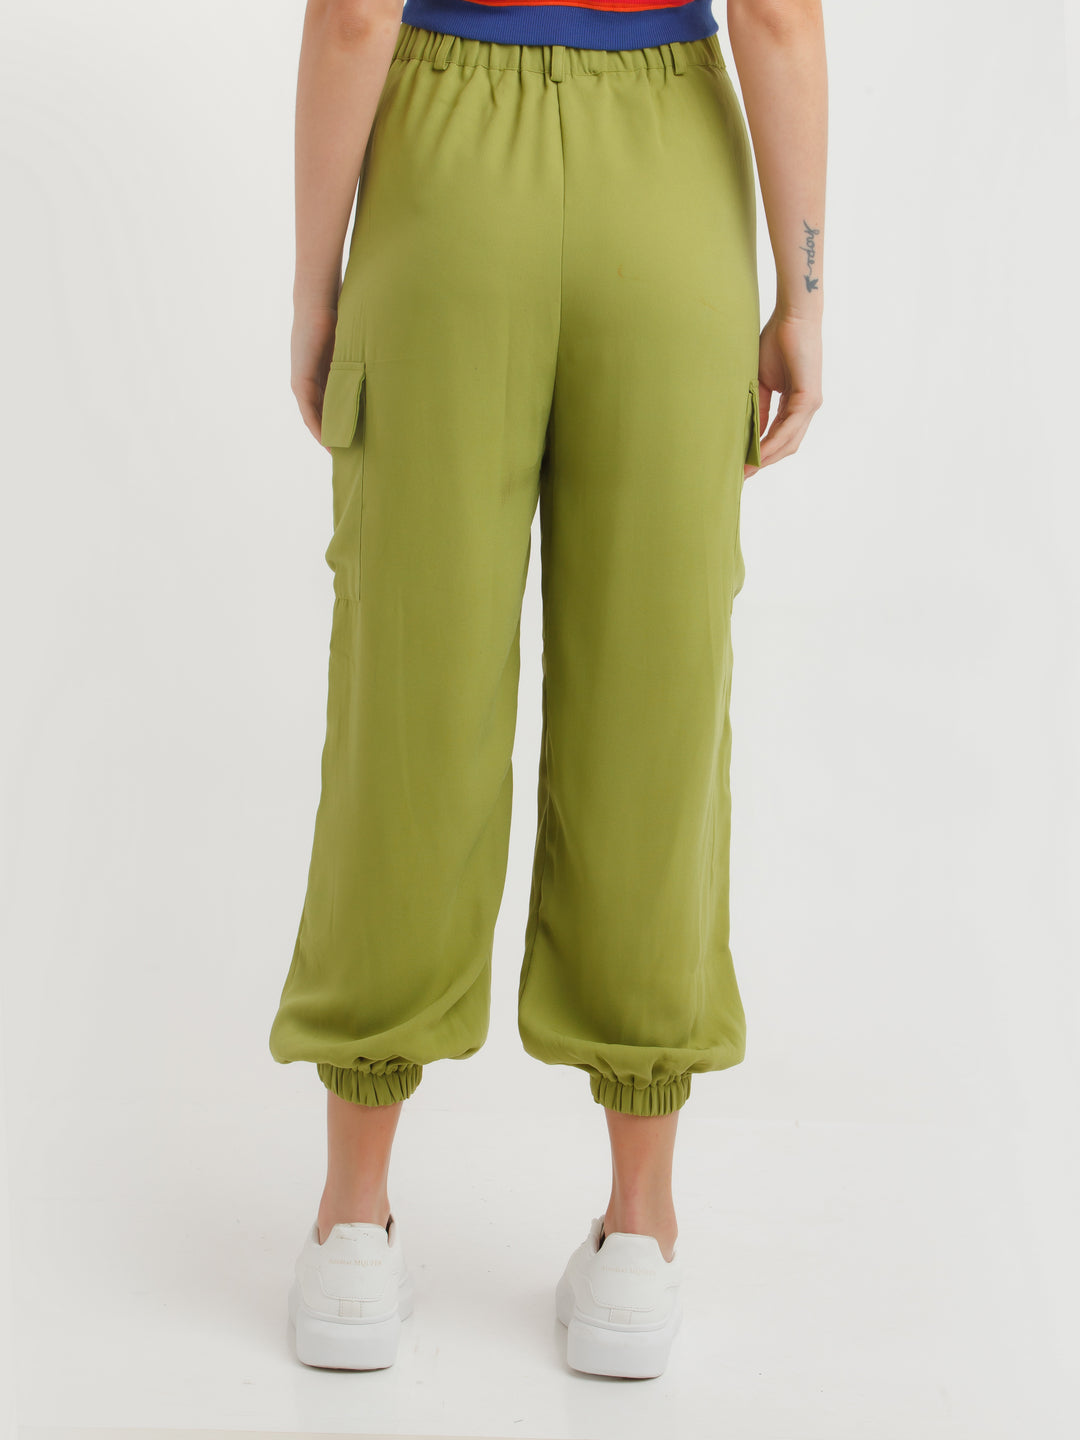 Green Solid Joggers For Women